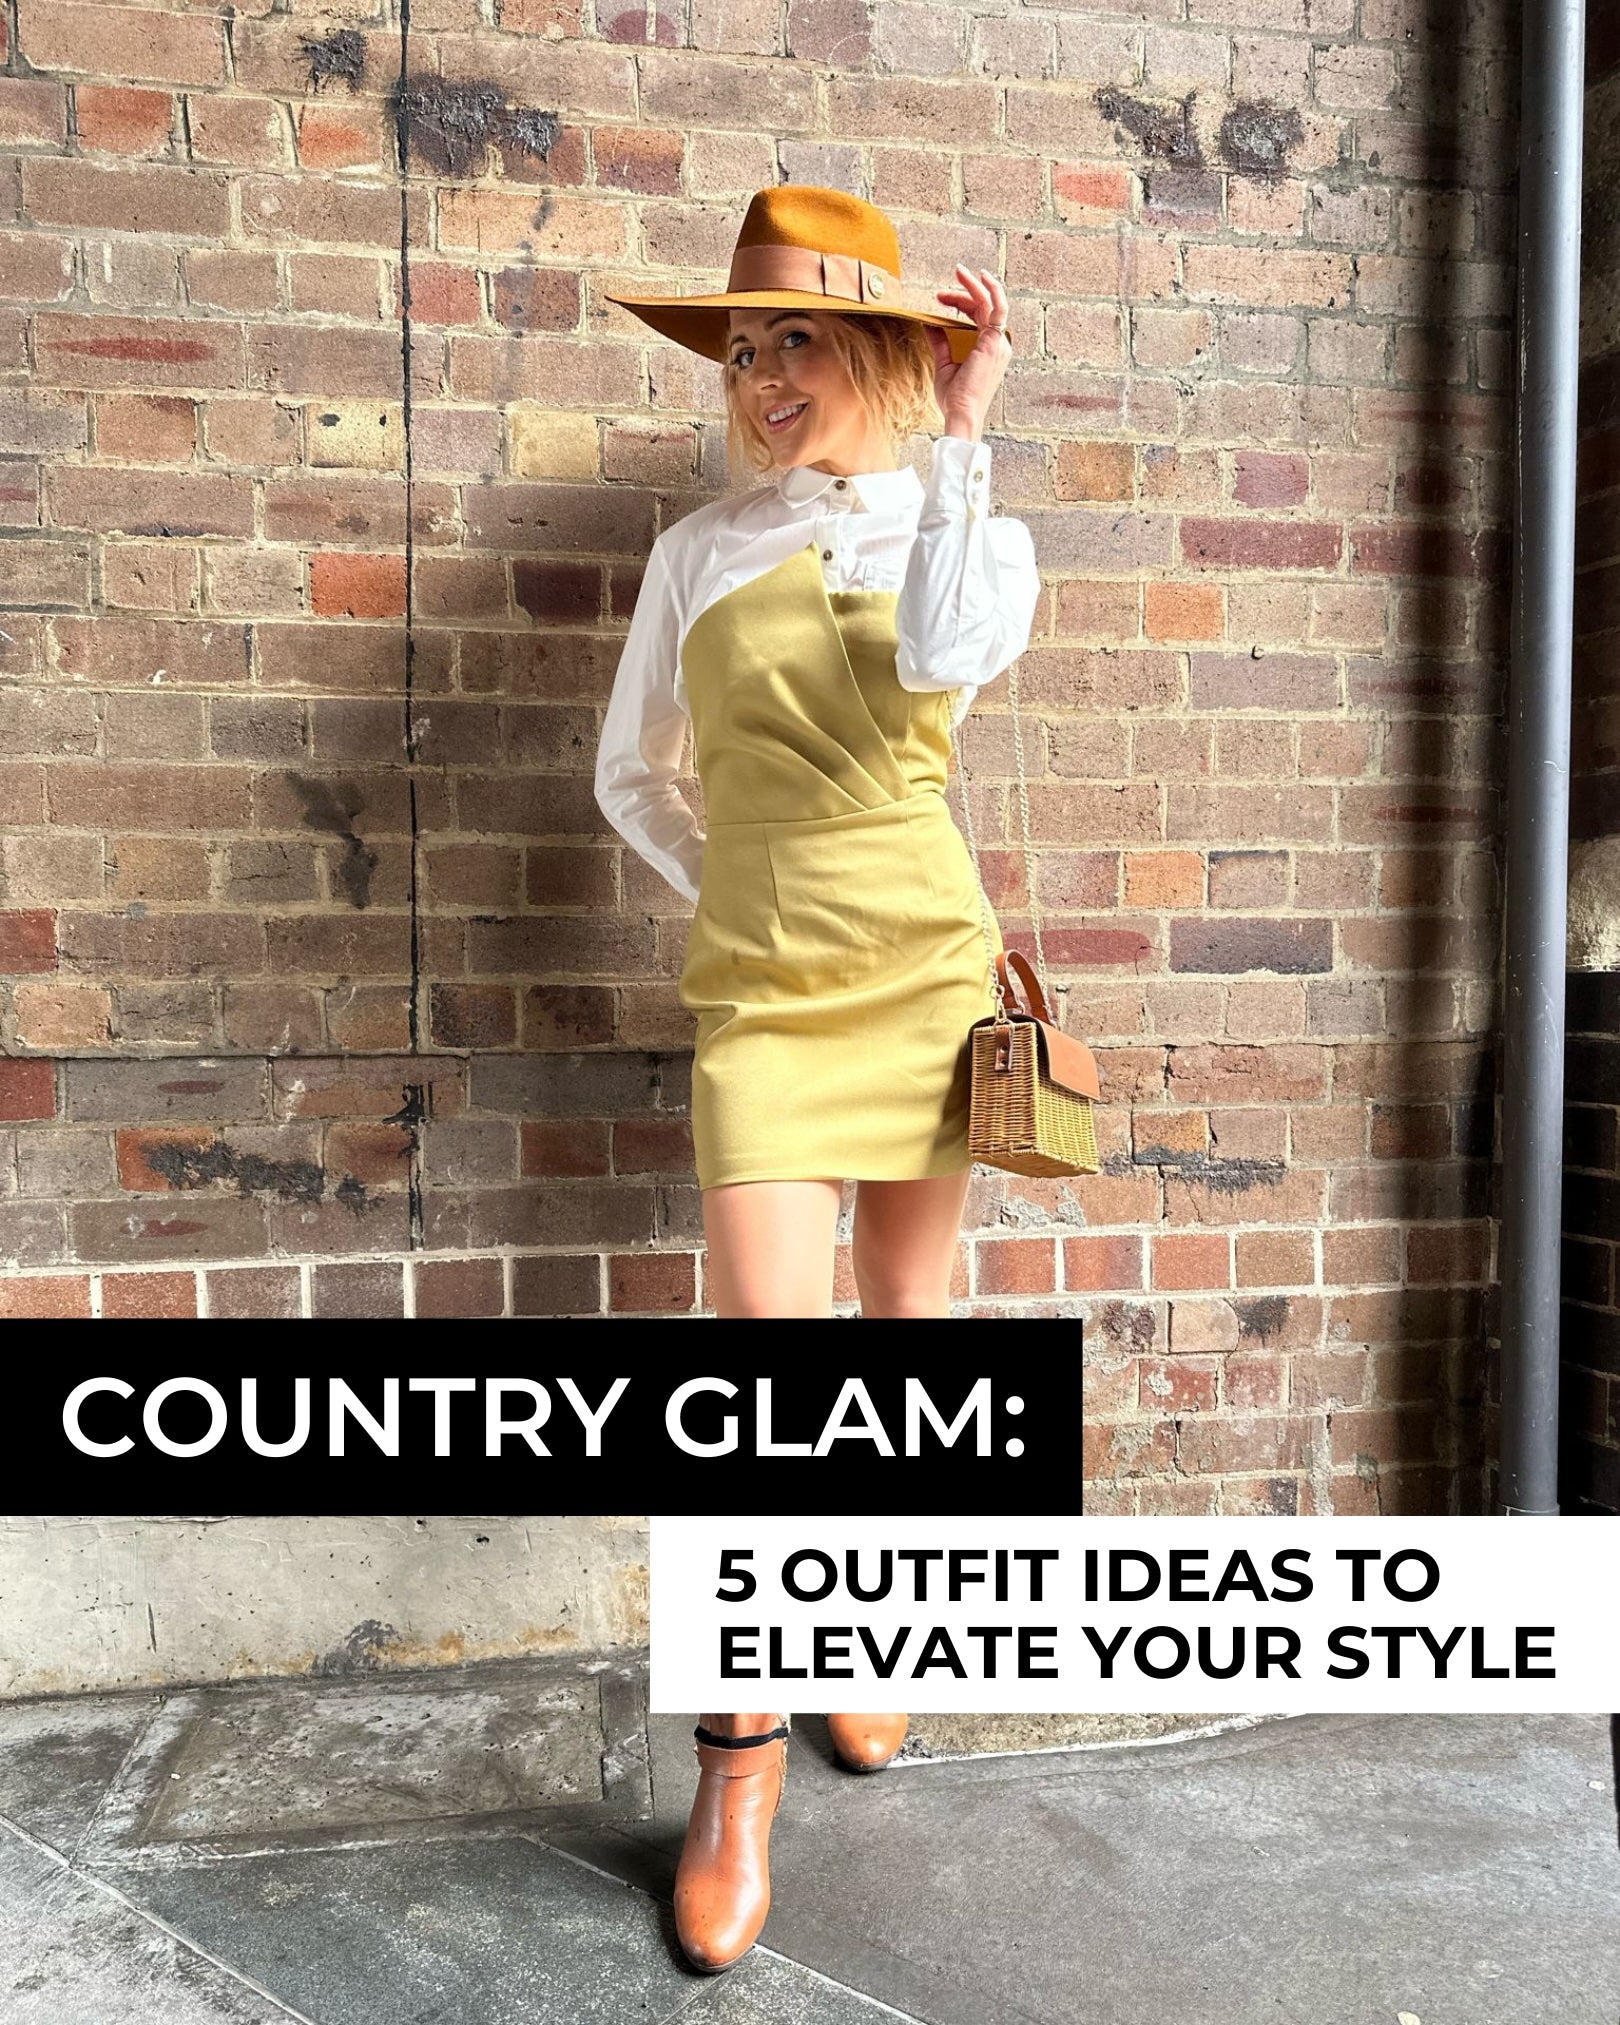 Embrace Country Glam: 5 Outfit Ideas to Elevate Your Style